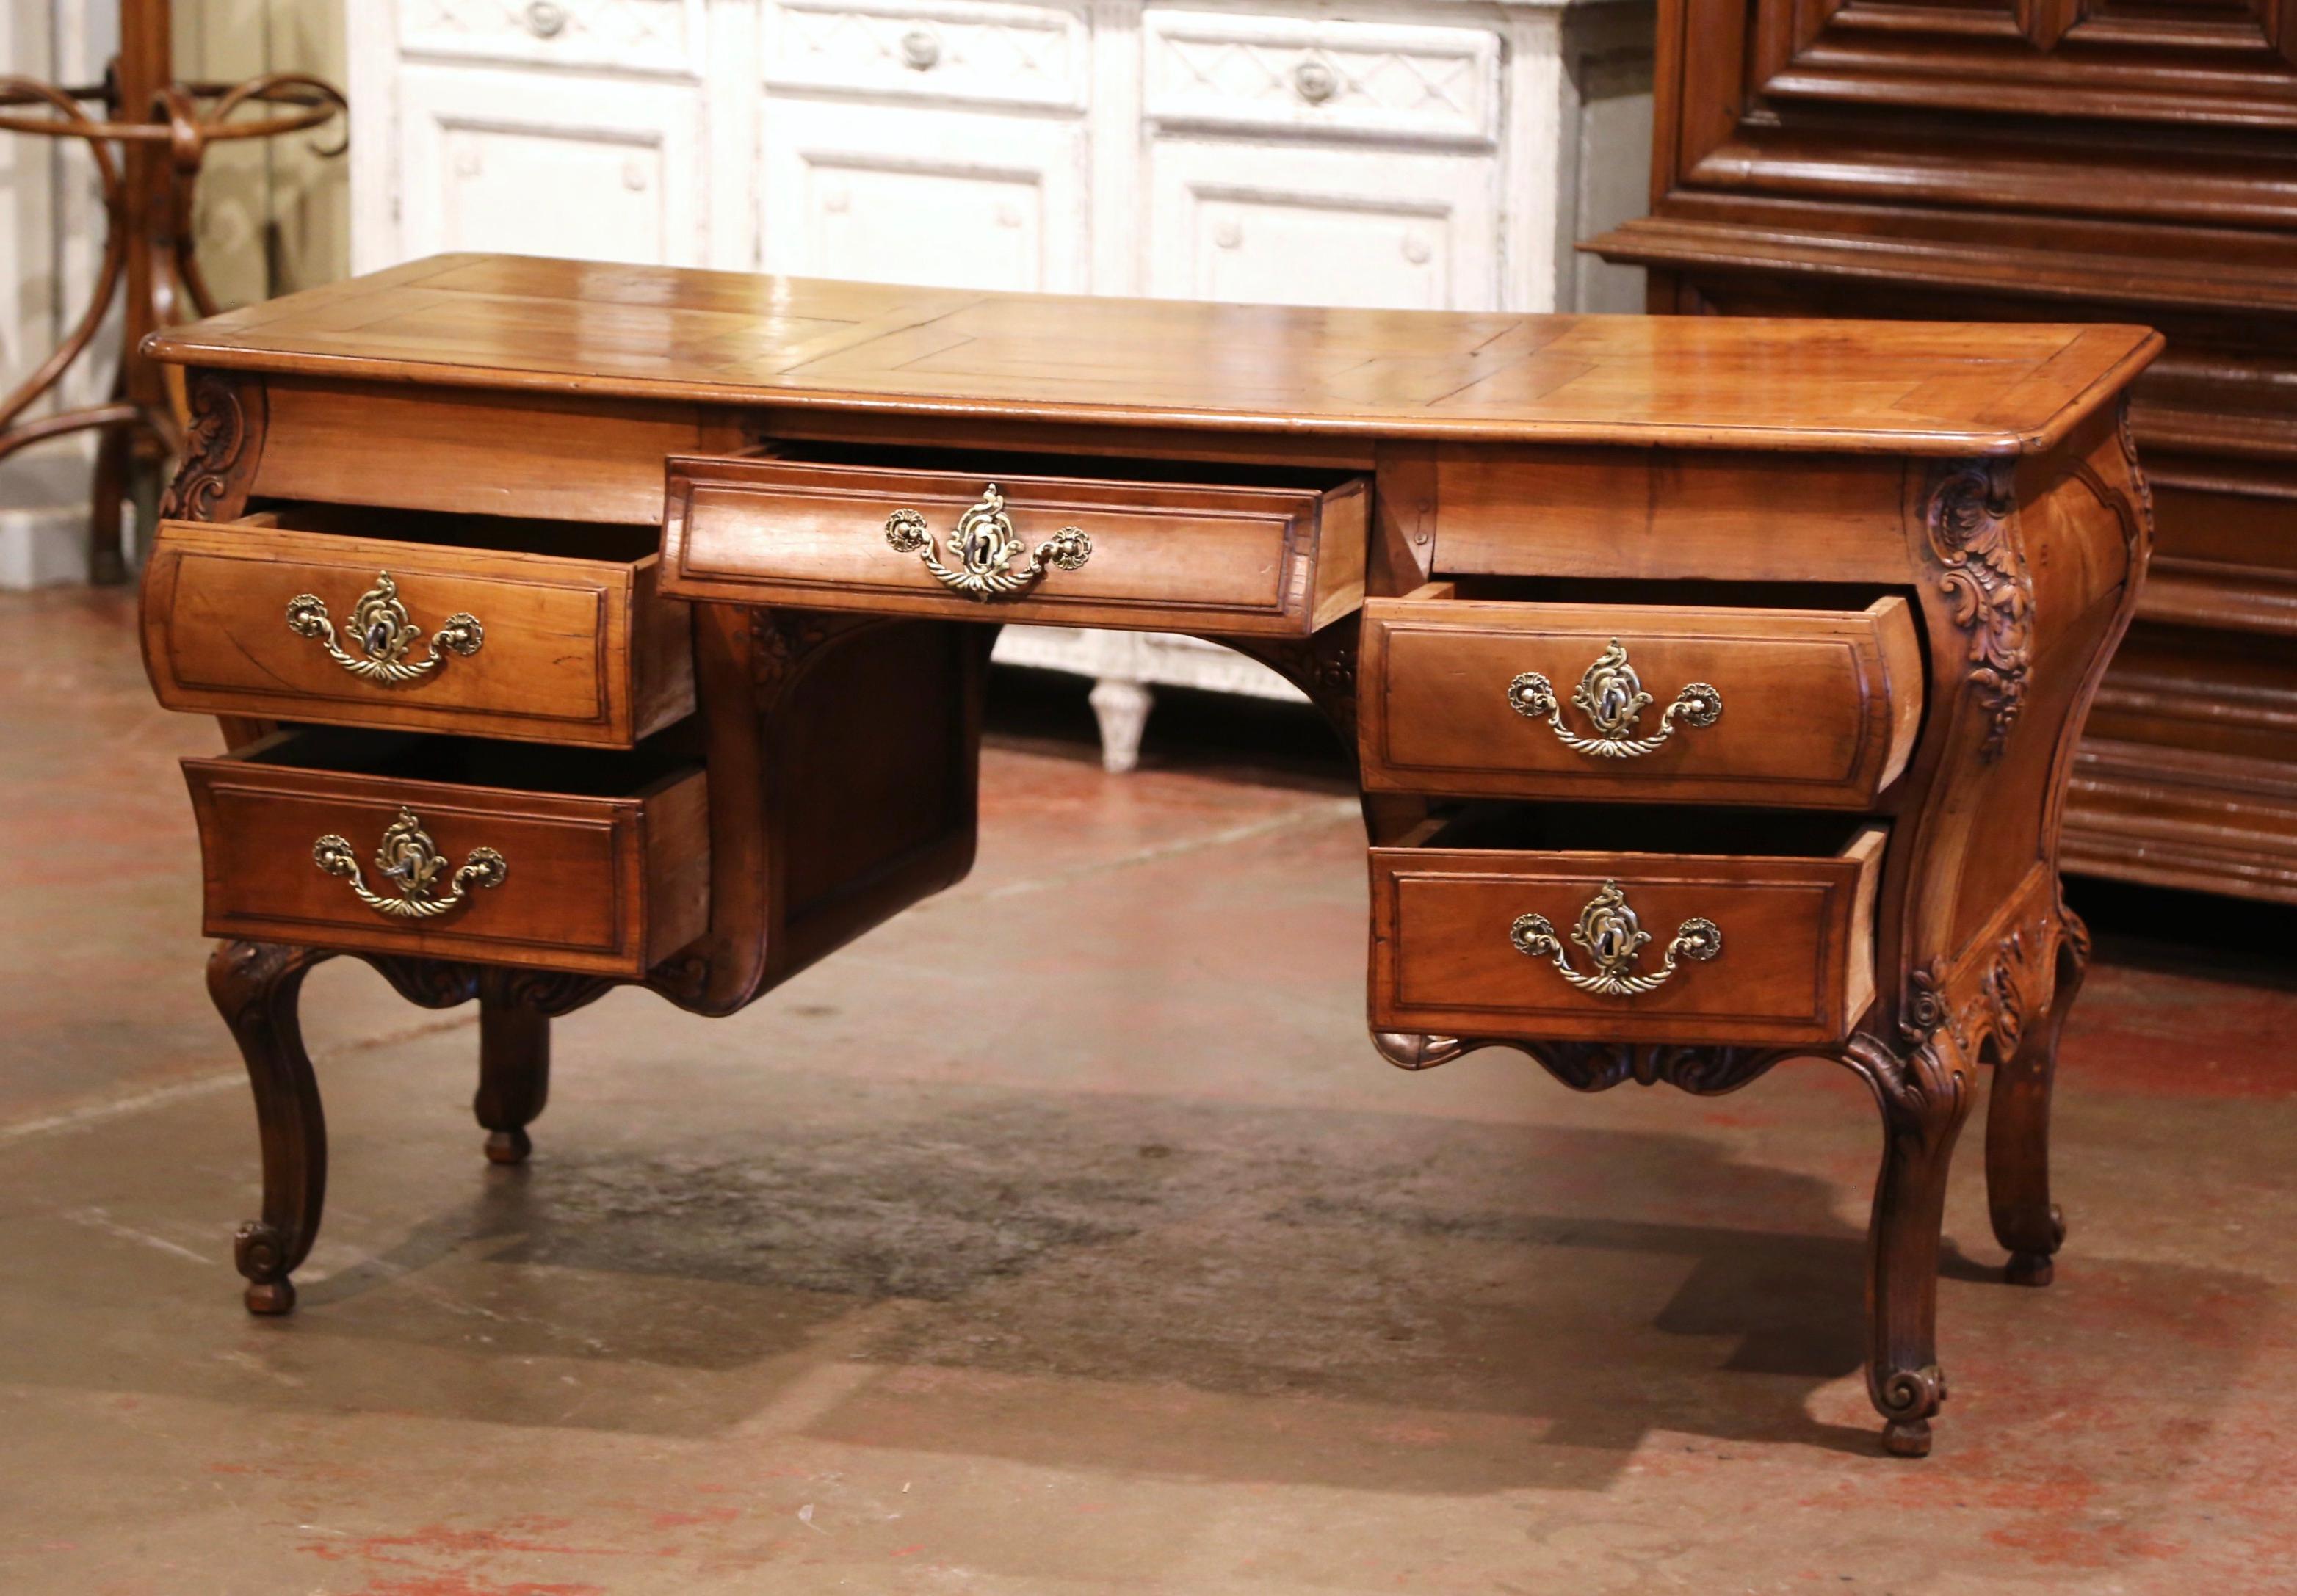 18th Century French Louis XV Carved Serpentine Cherry Desk with Parquetry Top In Excellent Condition For Sale In Dallas, TX